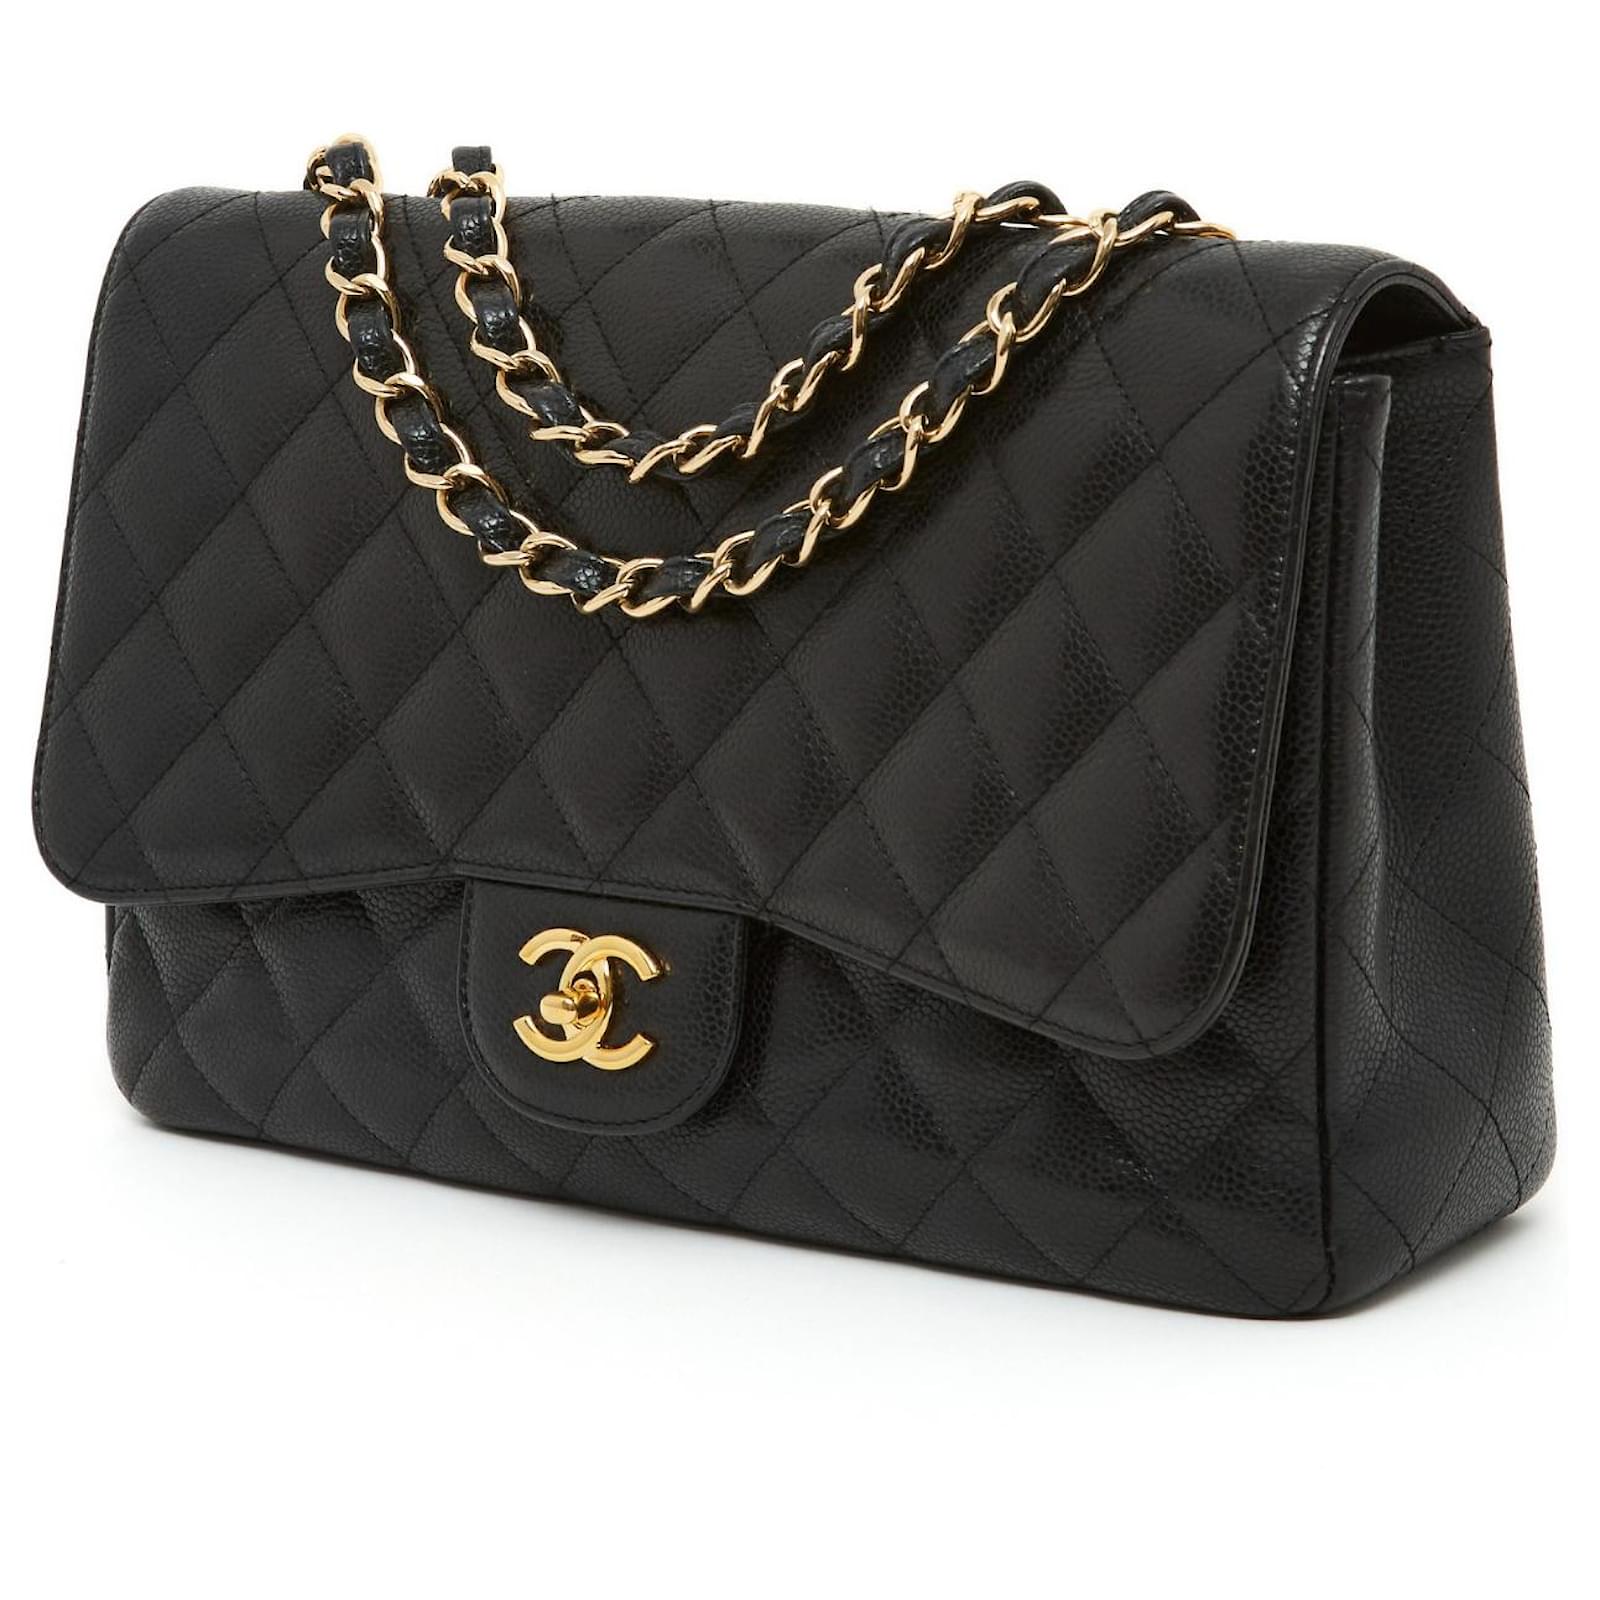 How To Buy A Chanel Bag And Not Pay Retail - Where Did U Get That